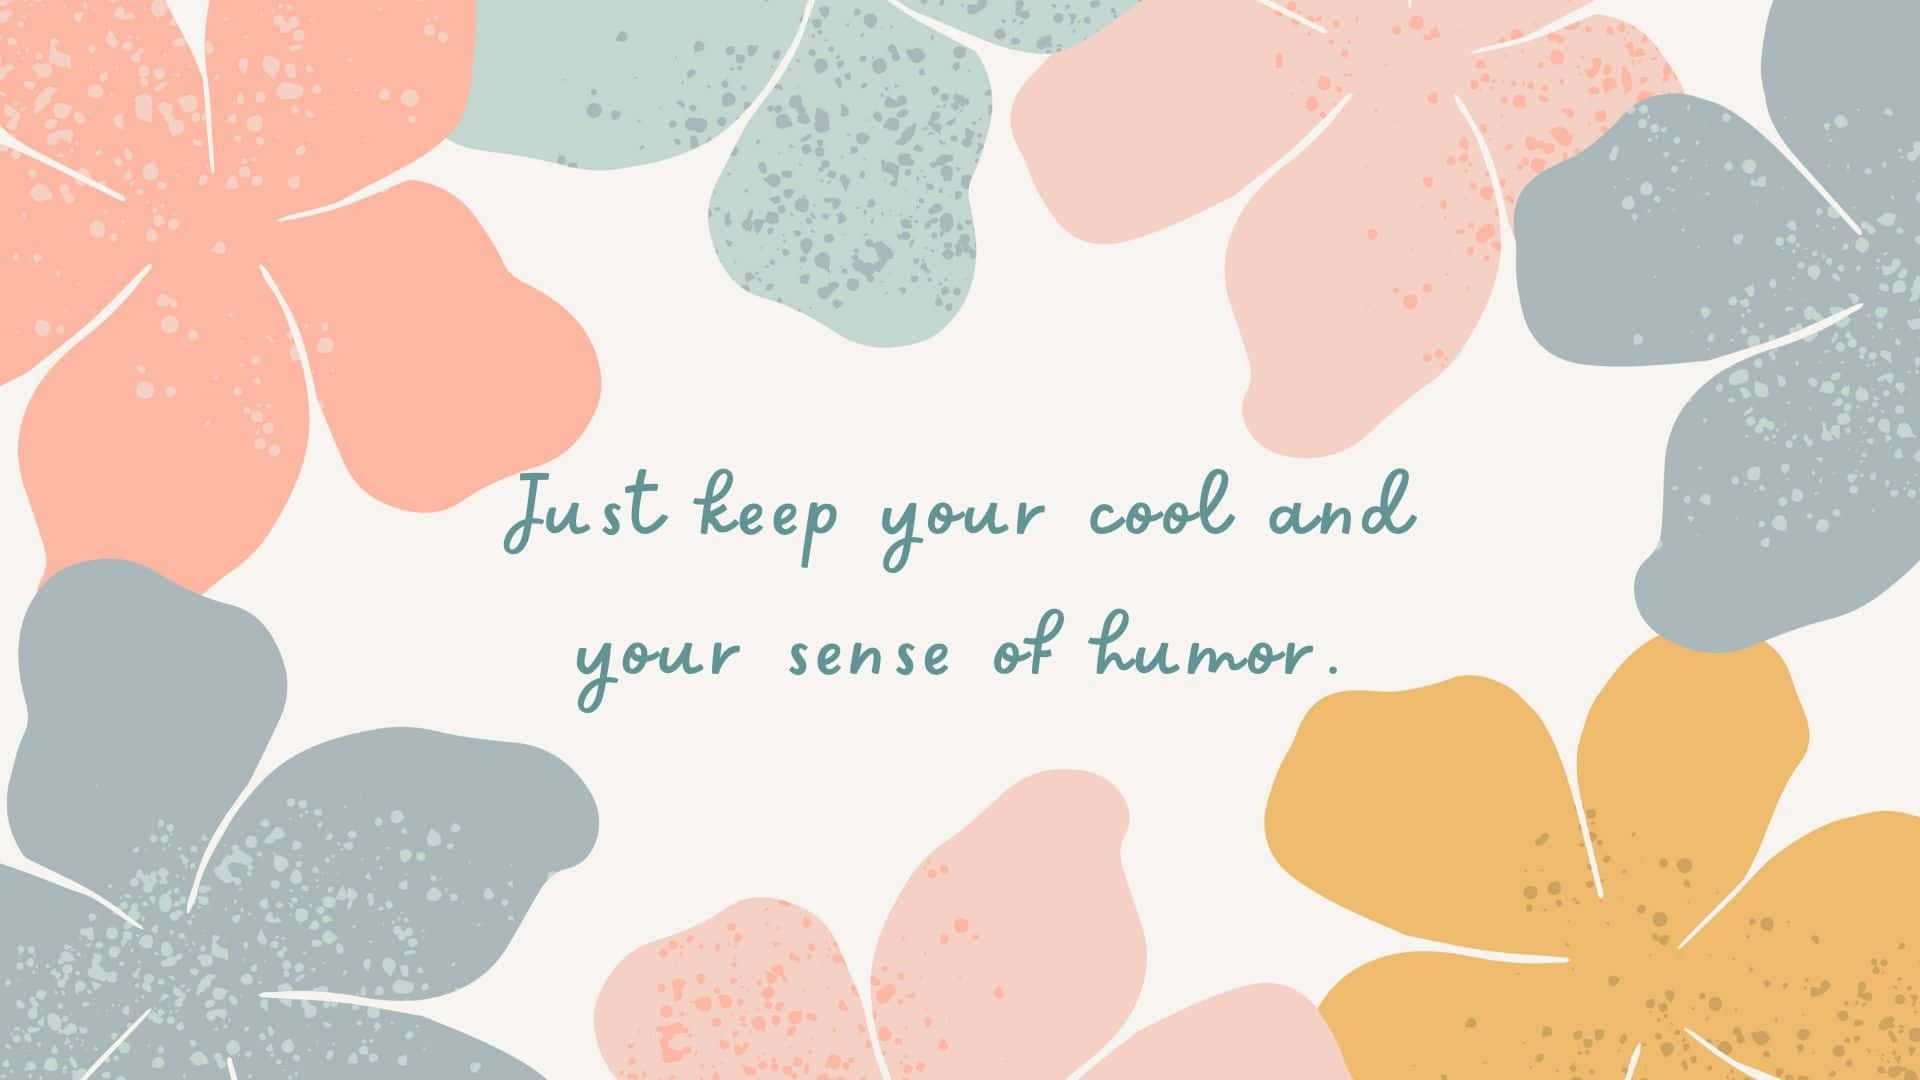 Just Keep Your Cool And Your Sense Of Humor